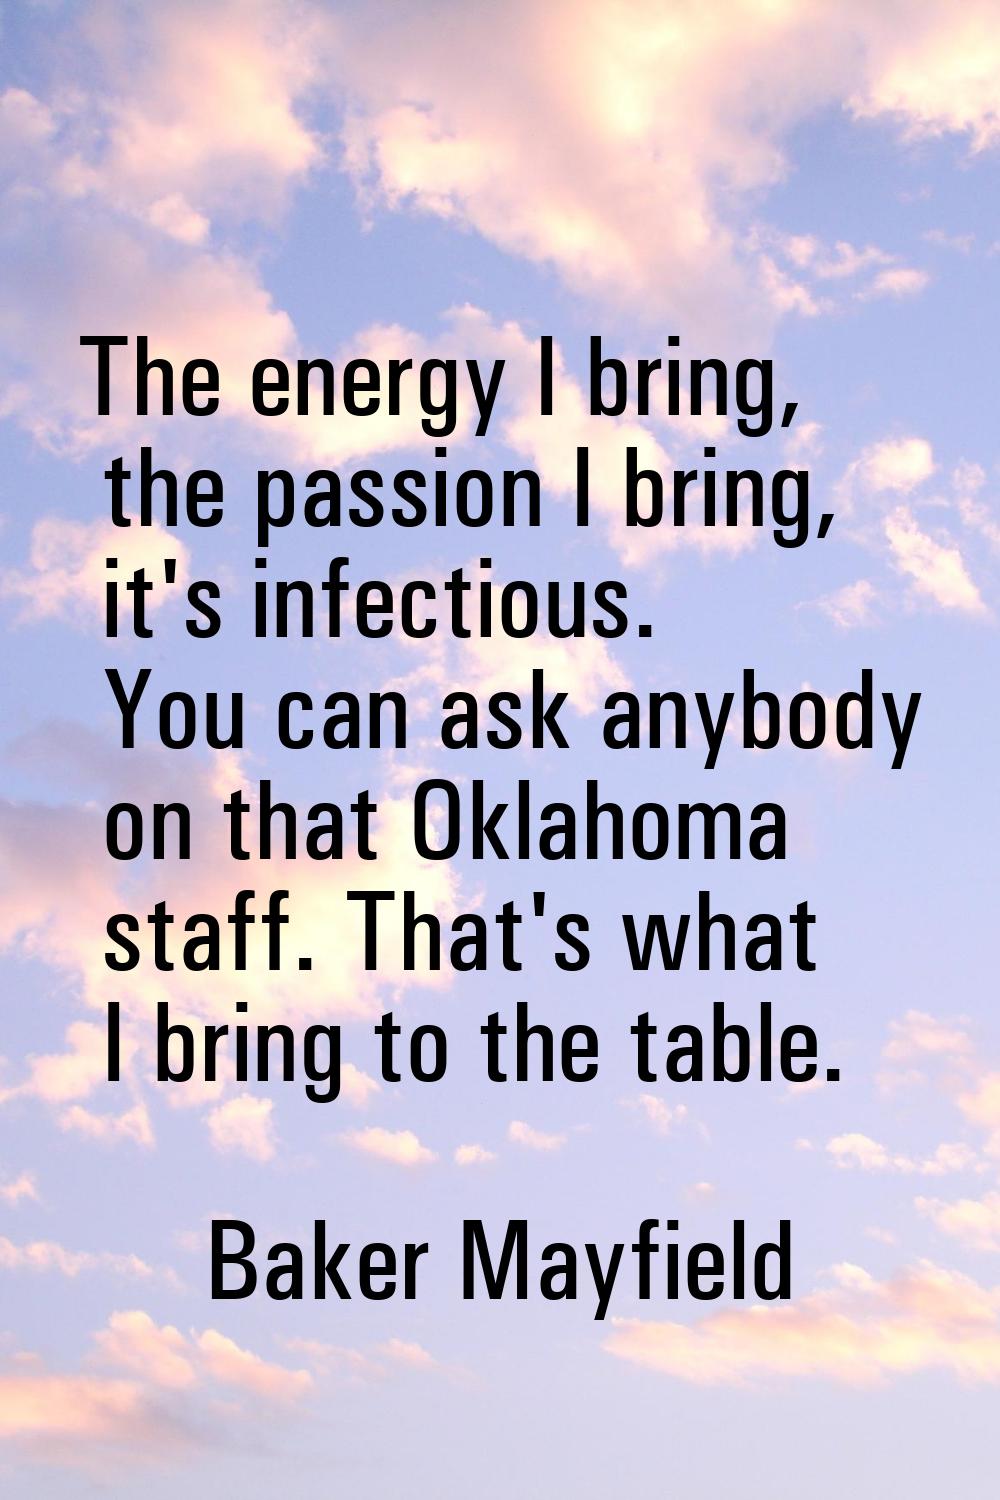 The energy I bring, the passion I bring, it's infectious. You can ask anybody on that Oklahoma staf